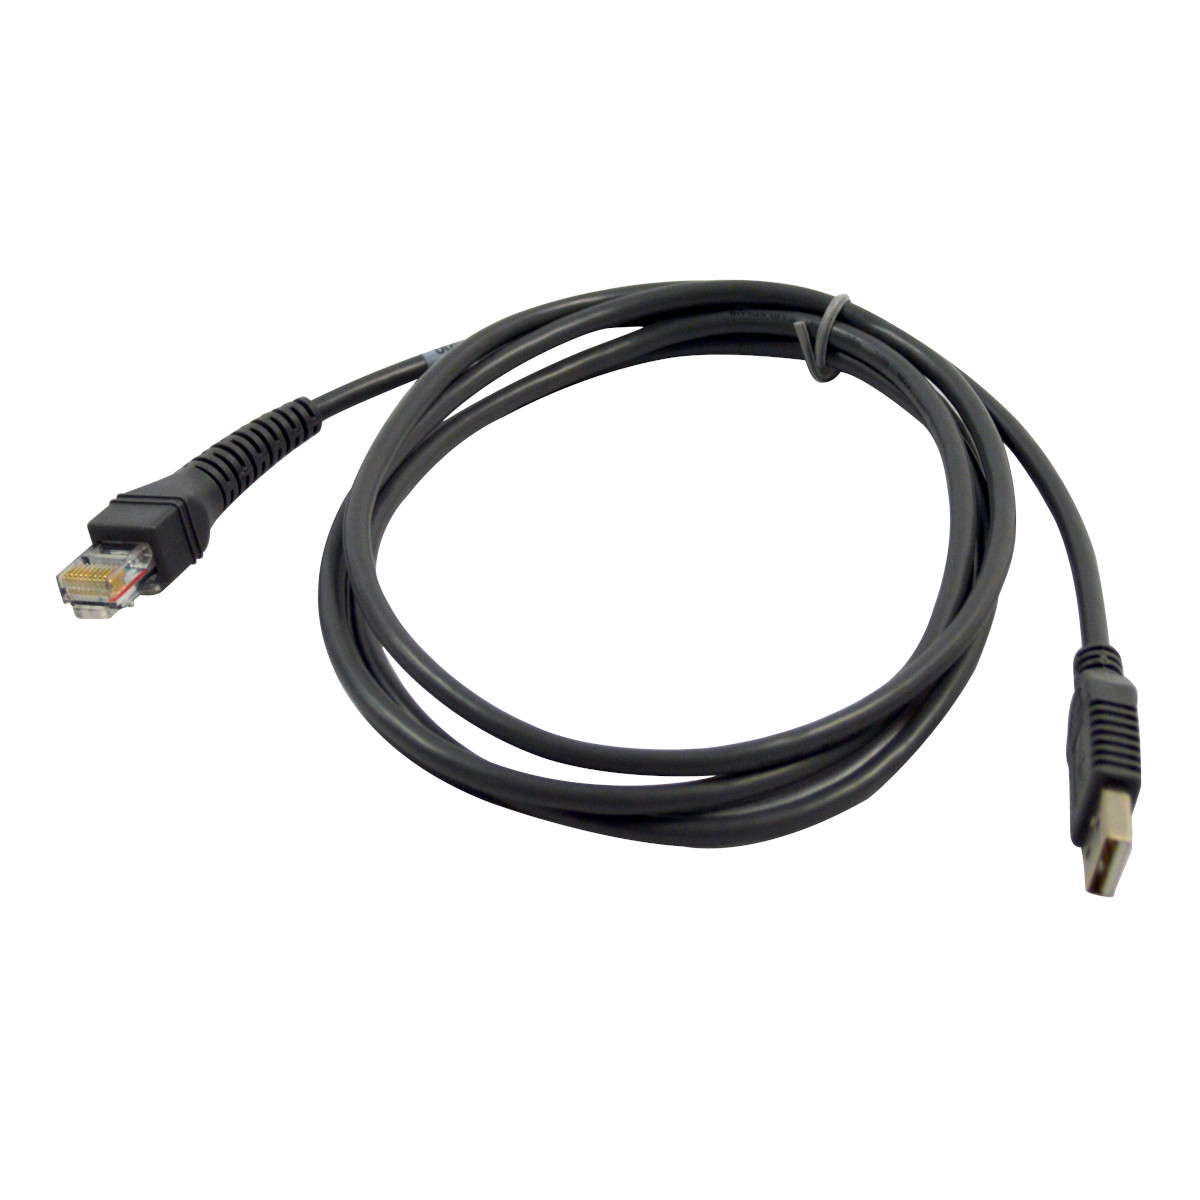 USB to RJ45 3' Cable for Code Reader